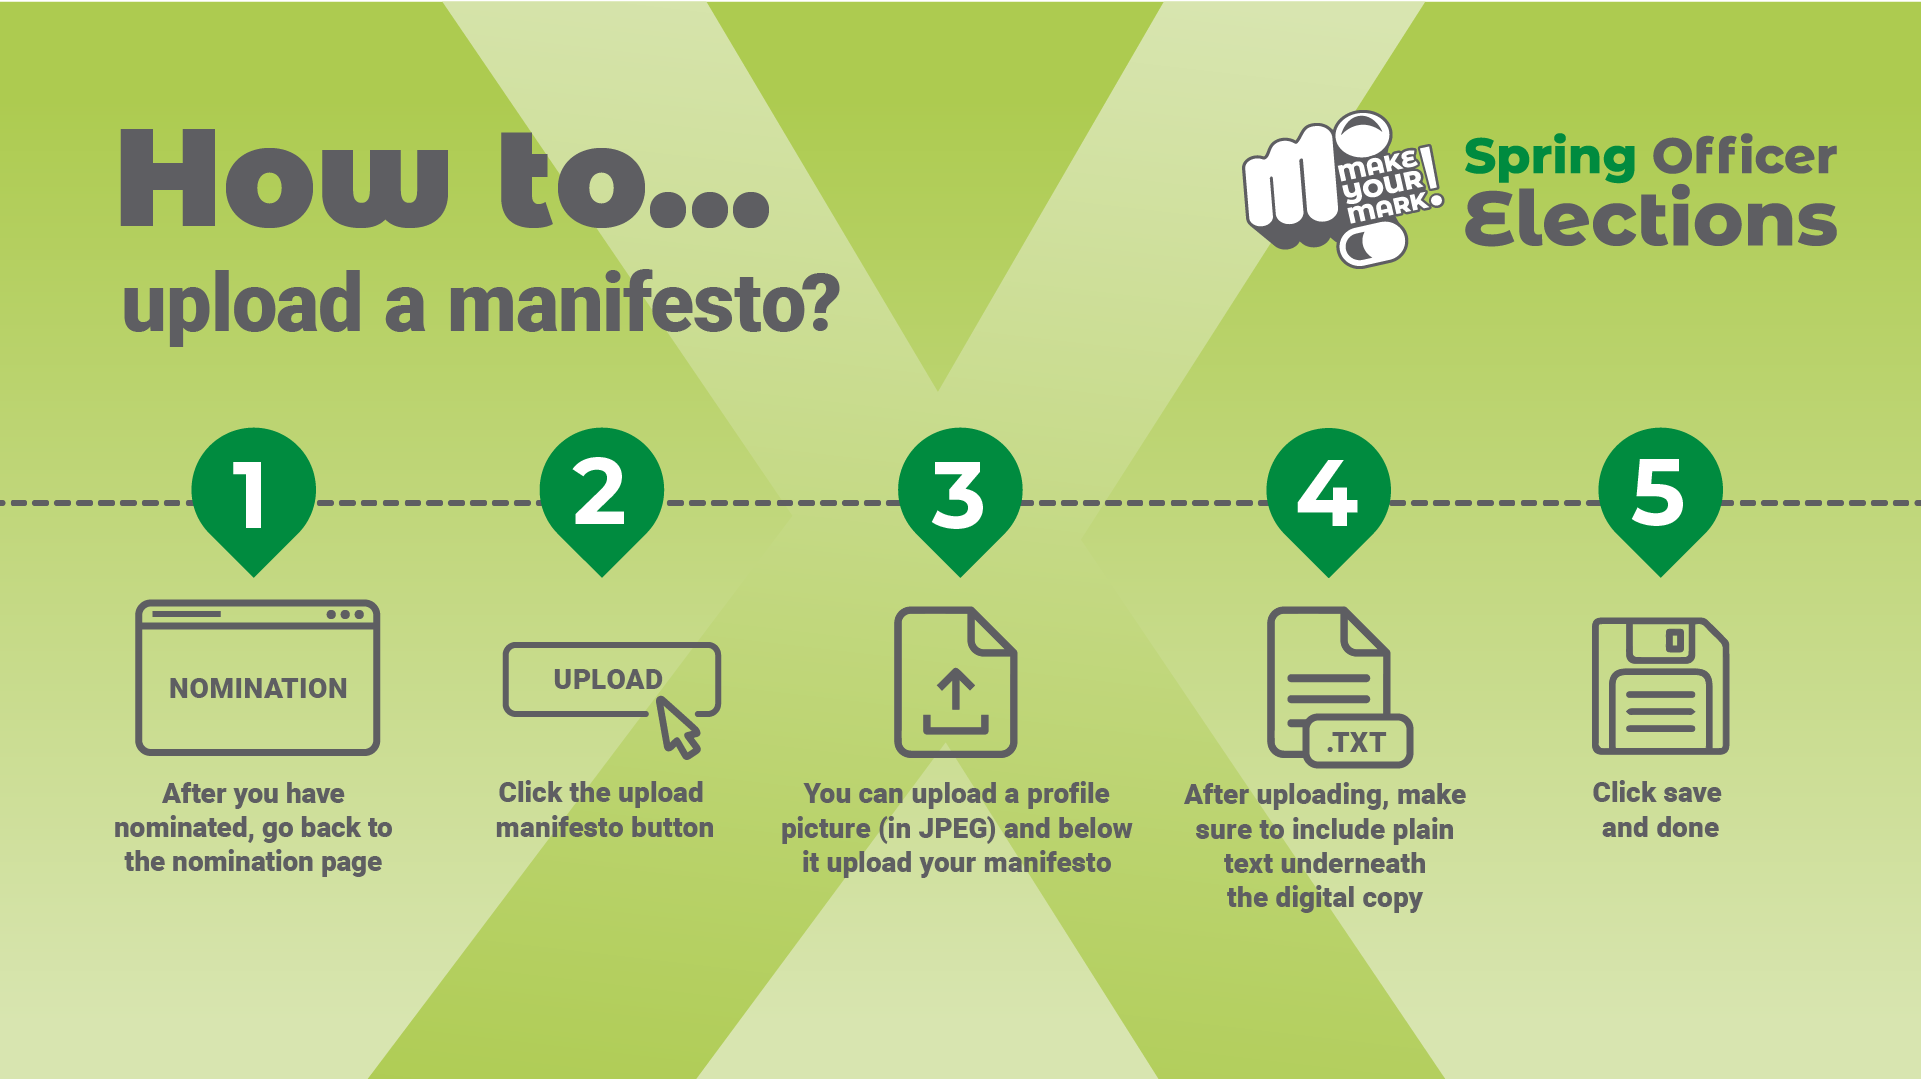 How to Upload a Manifesto